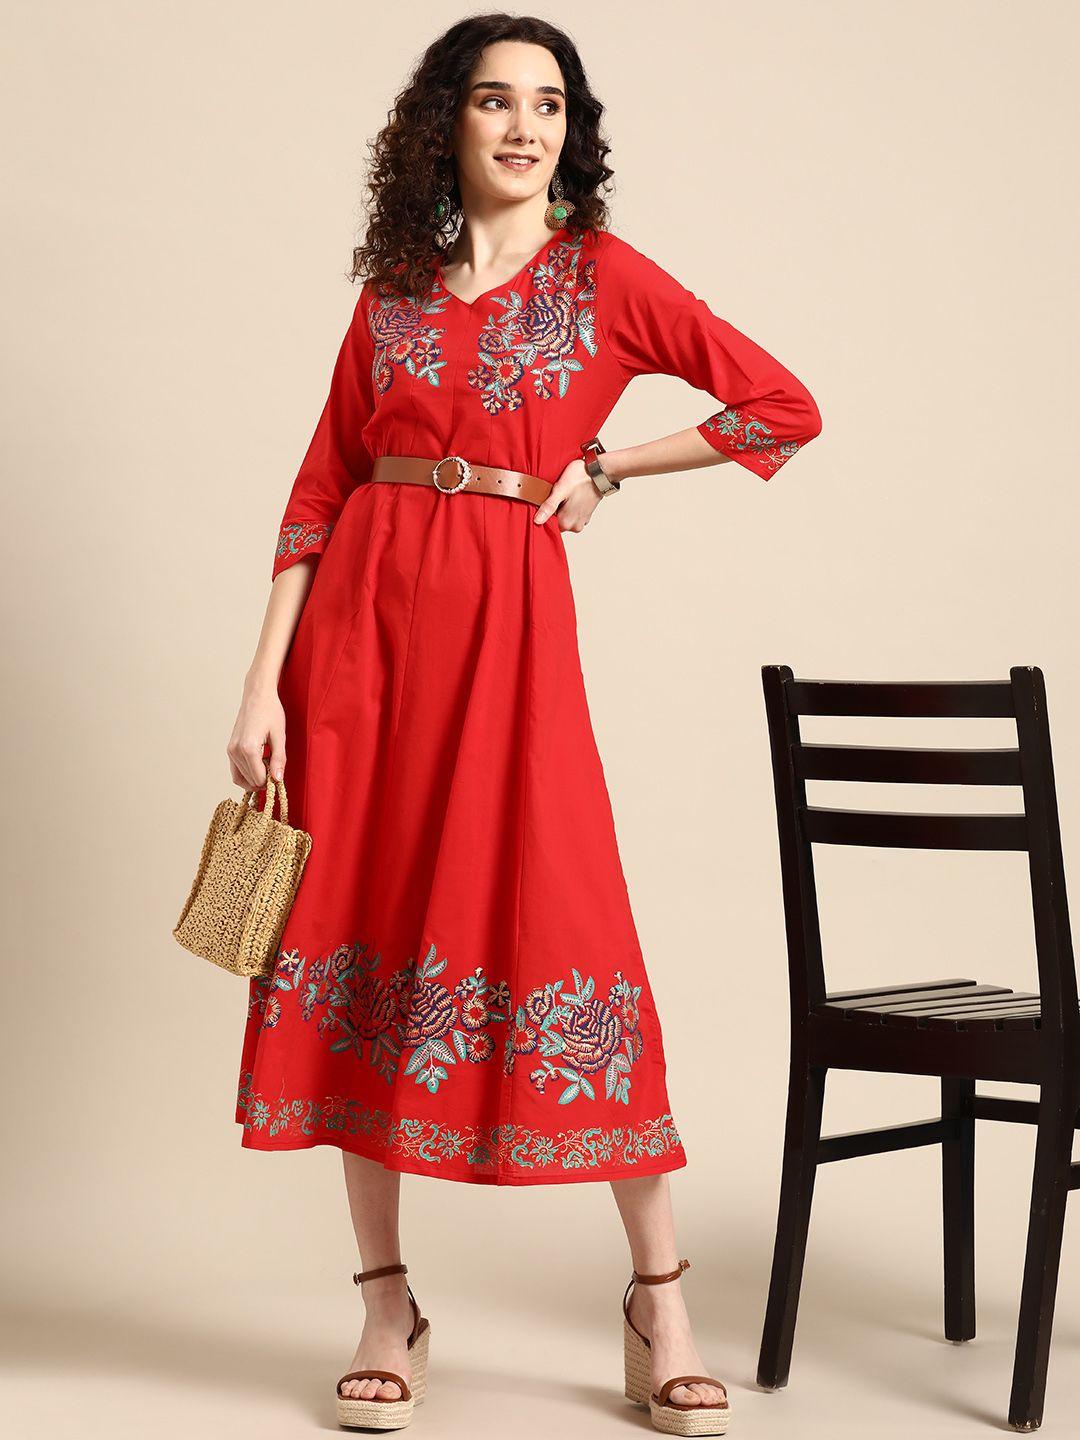 sangria-red-floral-embroidered-ethnic-maxi-dress